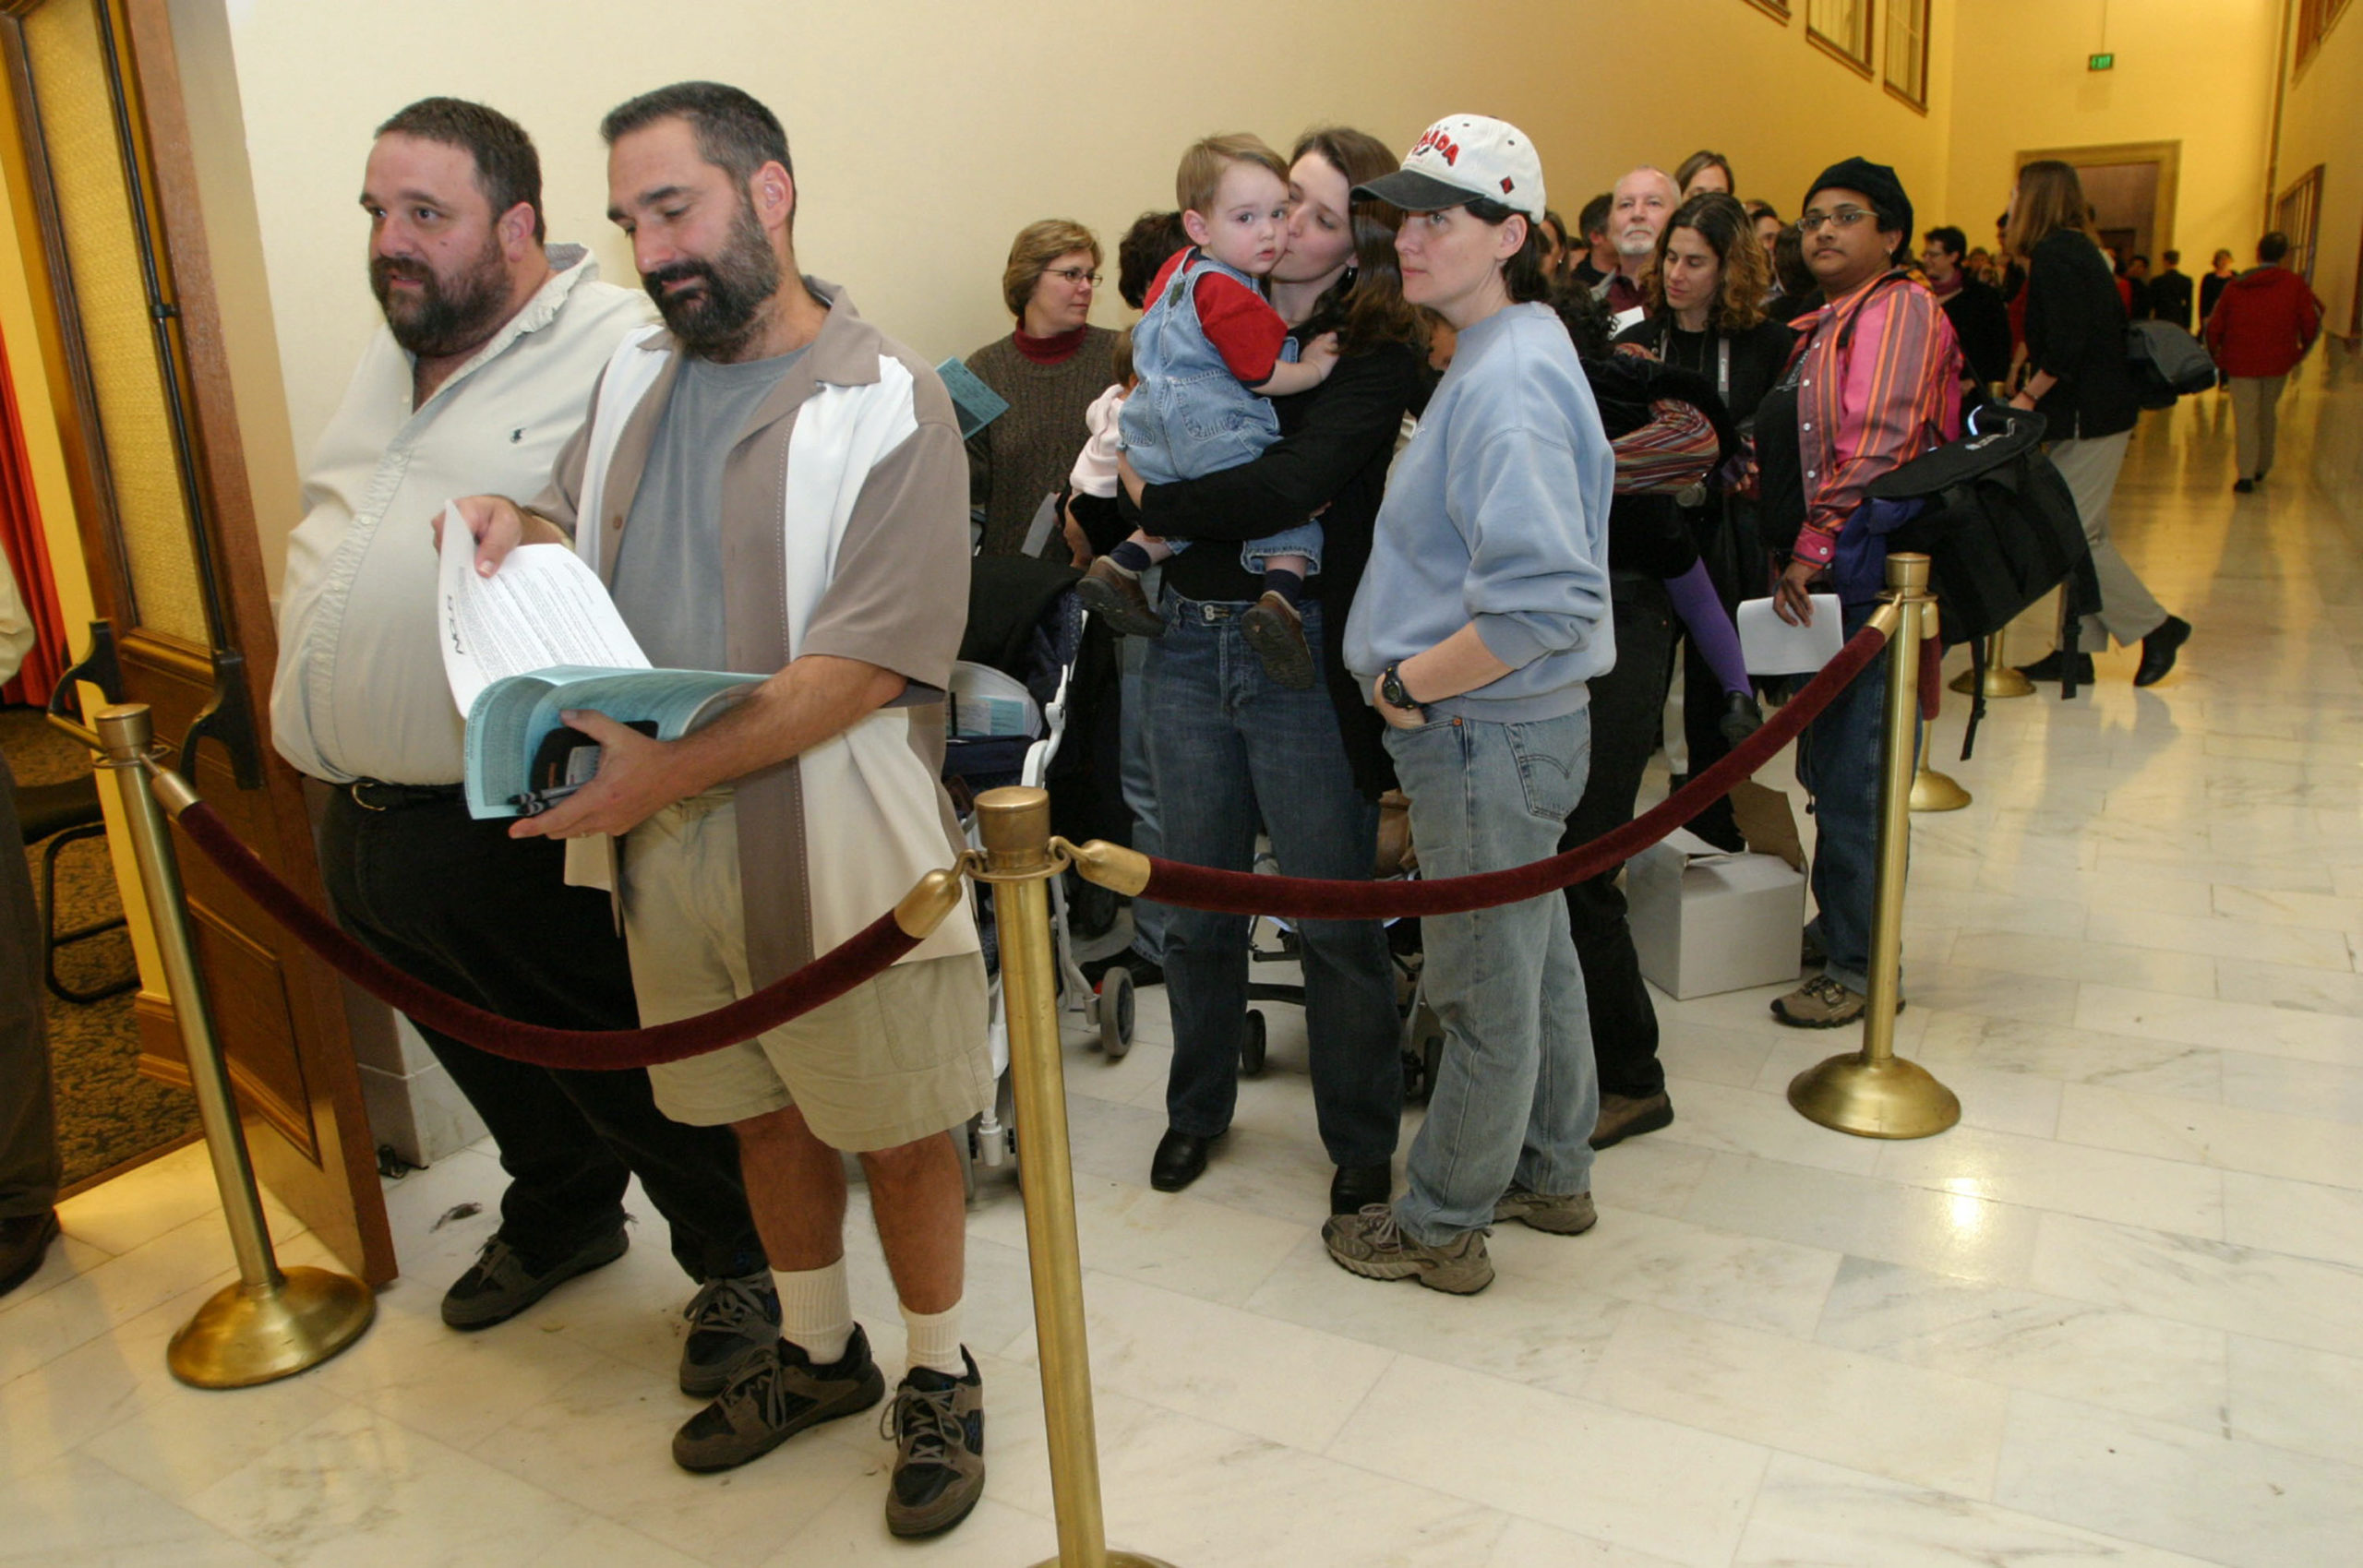 Hundreds of gay couples line up in front of the County Clerk's office at San Francisco City Hall to register for marriage forms on February 13, 2004